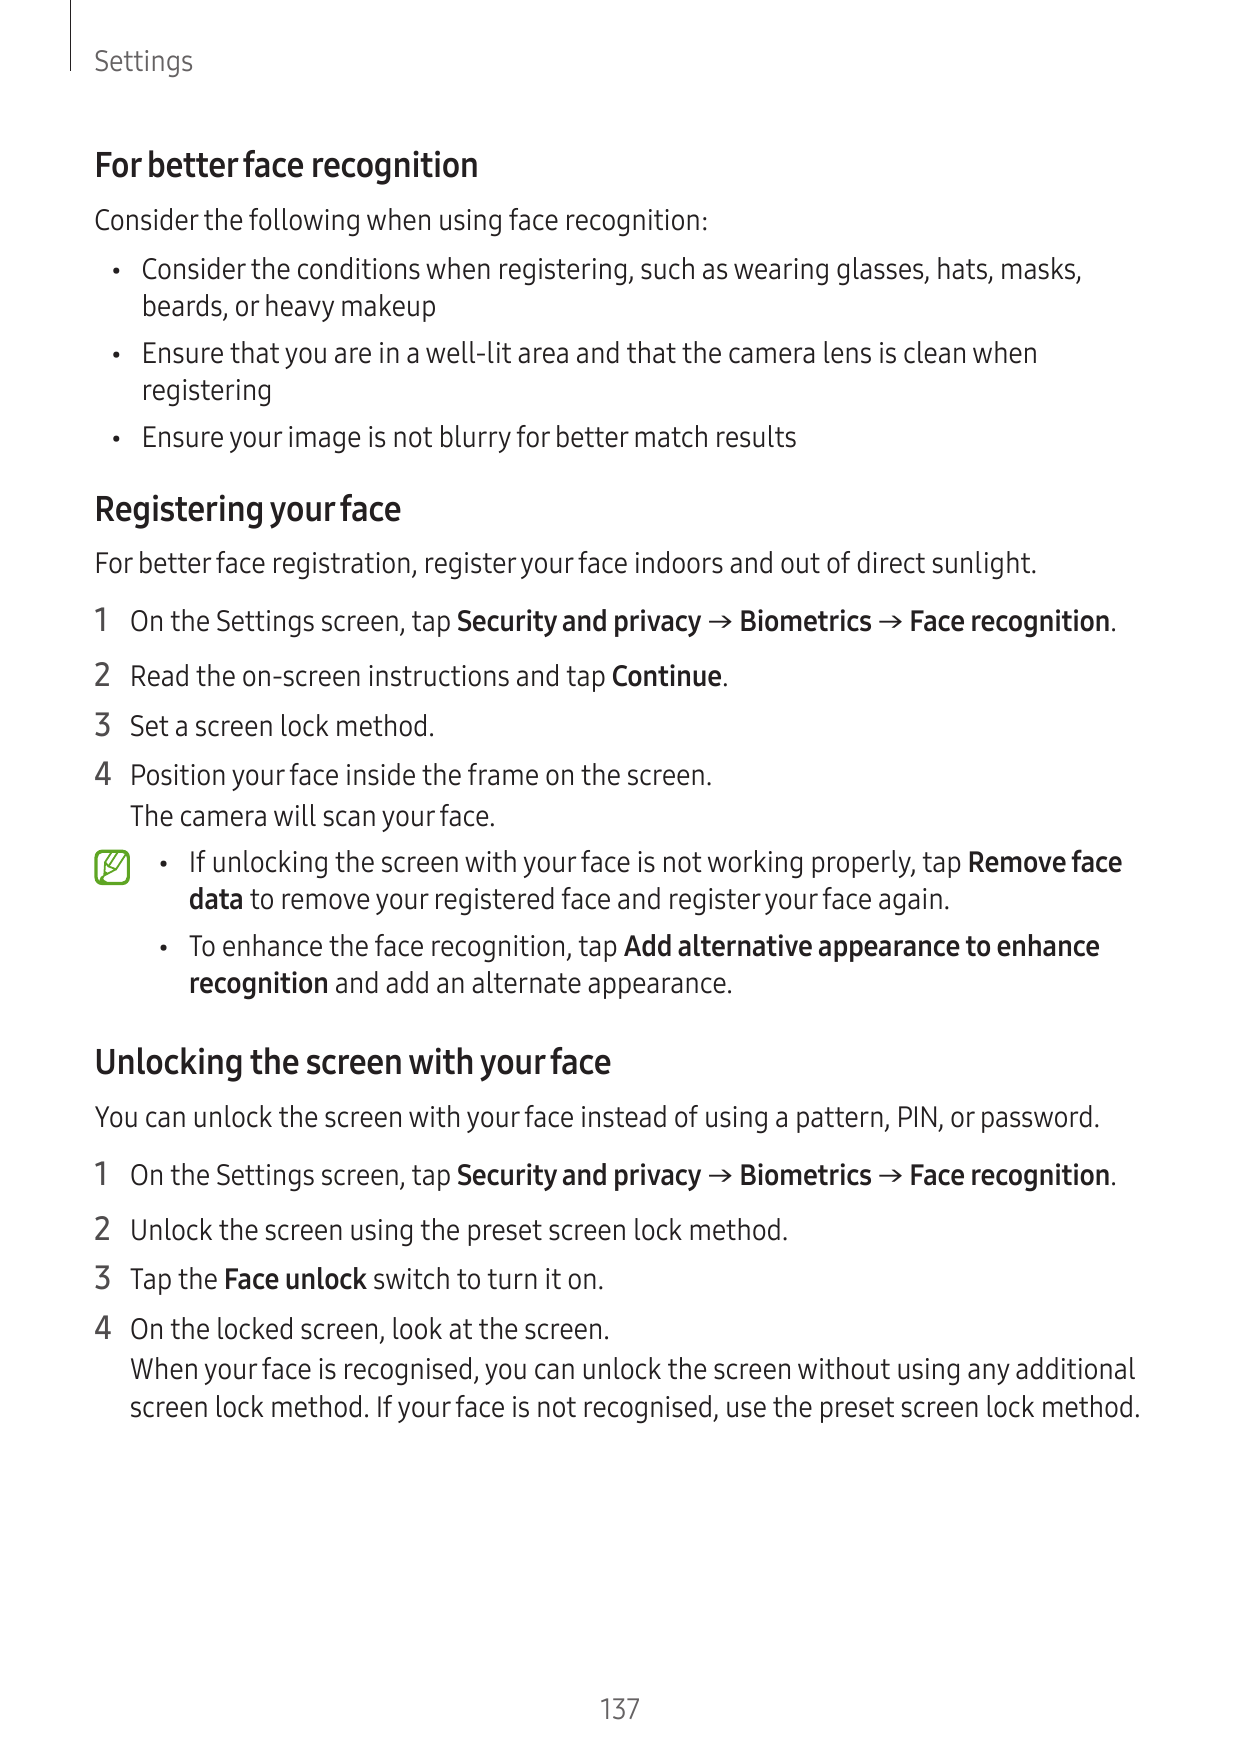 SettingsFor better face recognitionConsider the following when using face recognition:•Consider the conditions when registering,